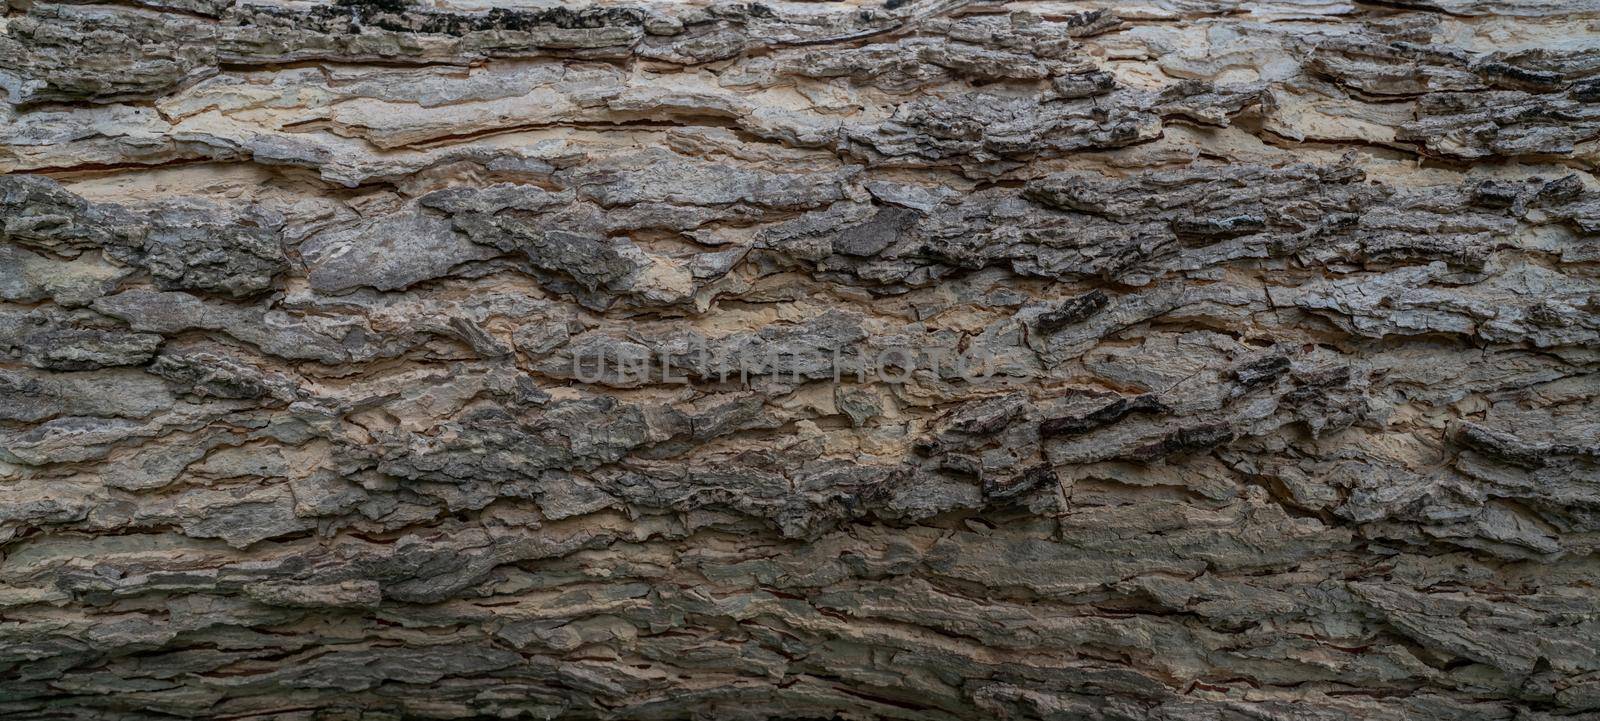 Full frame tree bark texture background. Gray wood skin abstract background. Pattern of natural tree bark texture. Rough surface of trunk. Nature background. Carbon neutral concept. Bark of rain tree. by Fahroni